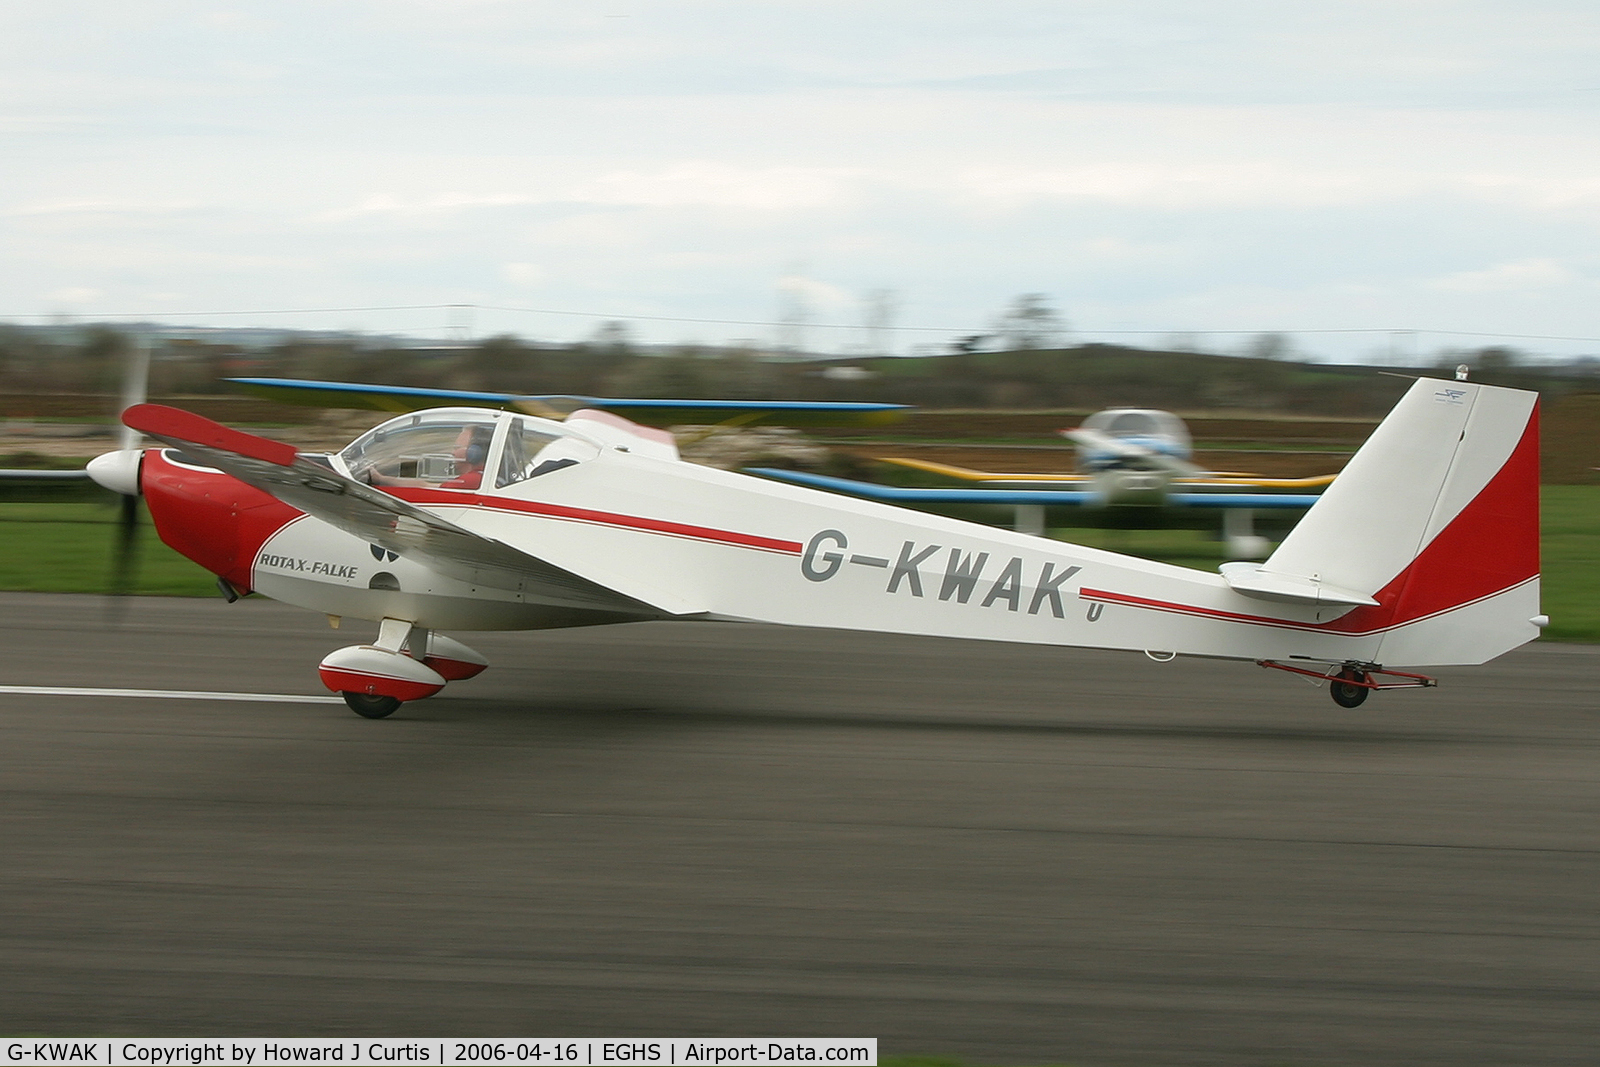 G-KWAK, 1995 Scheibe SF-25C Falke C/N 44581, Privately owned, at the PFA fly-in here.